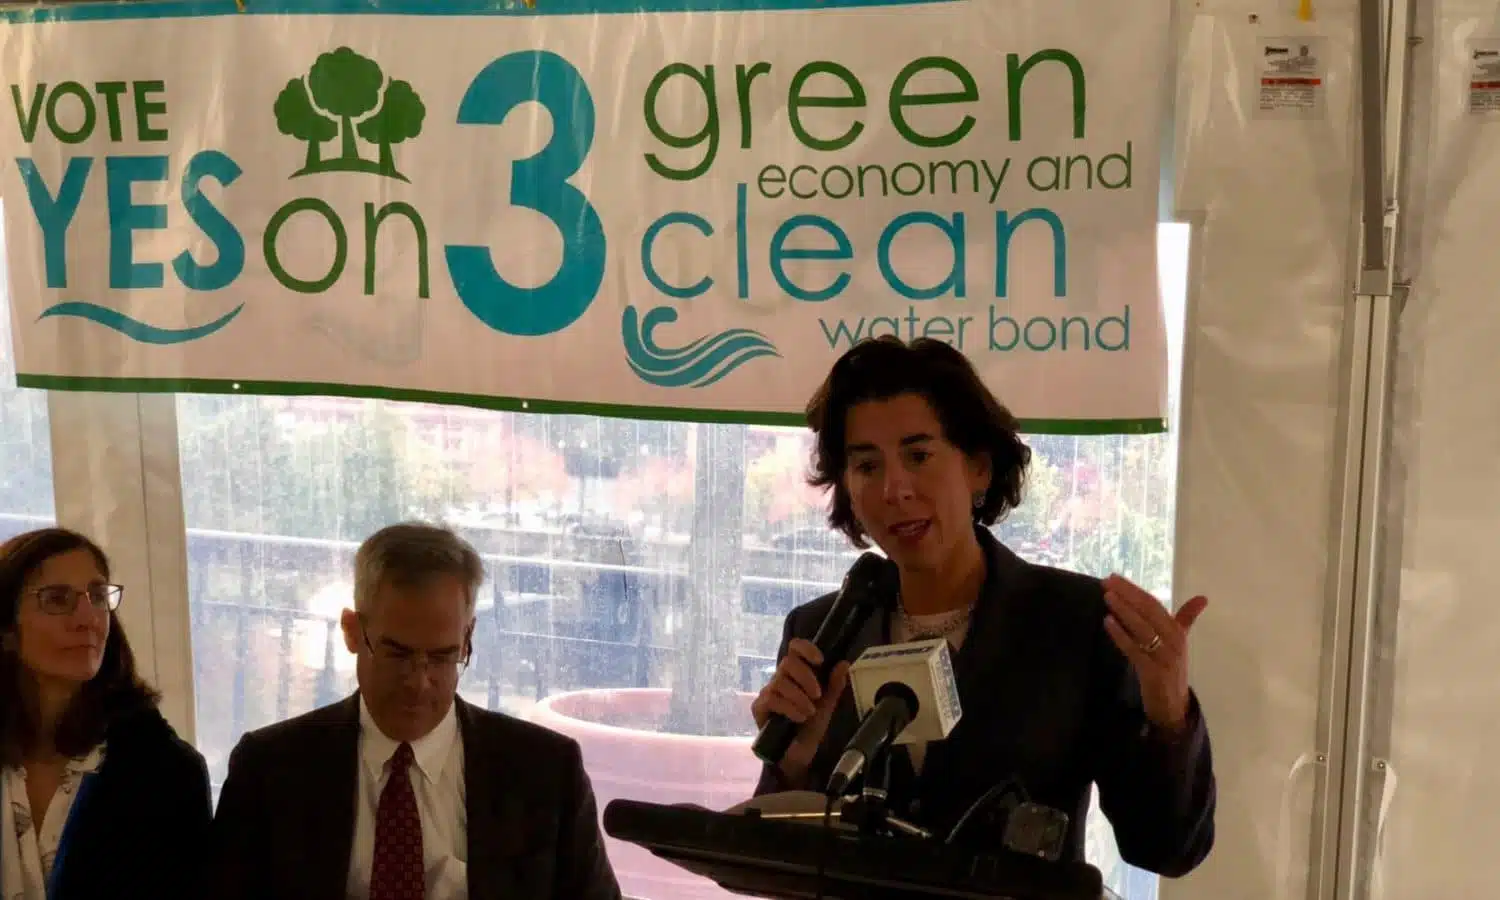 Yes on 3: Save The Bay holds rally in support for the Green Economy and Clean Water Bond